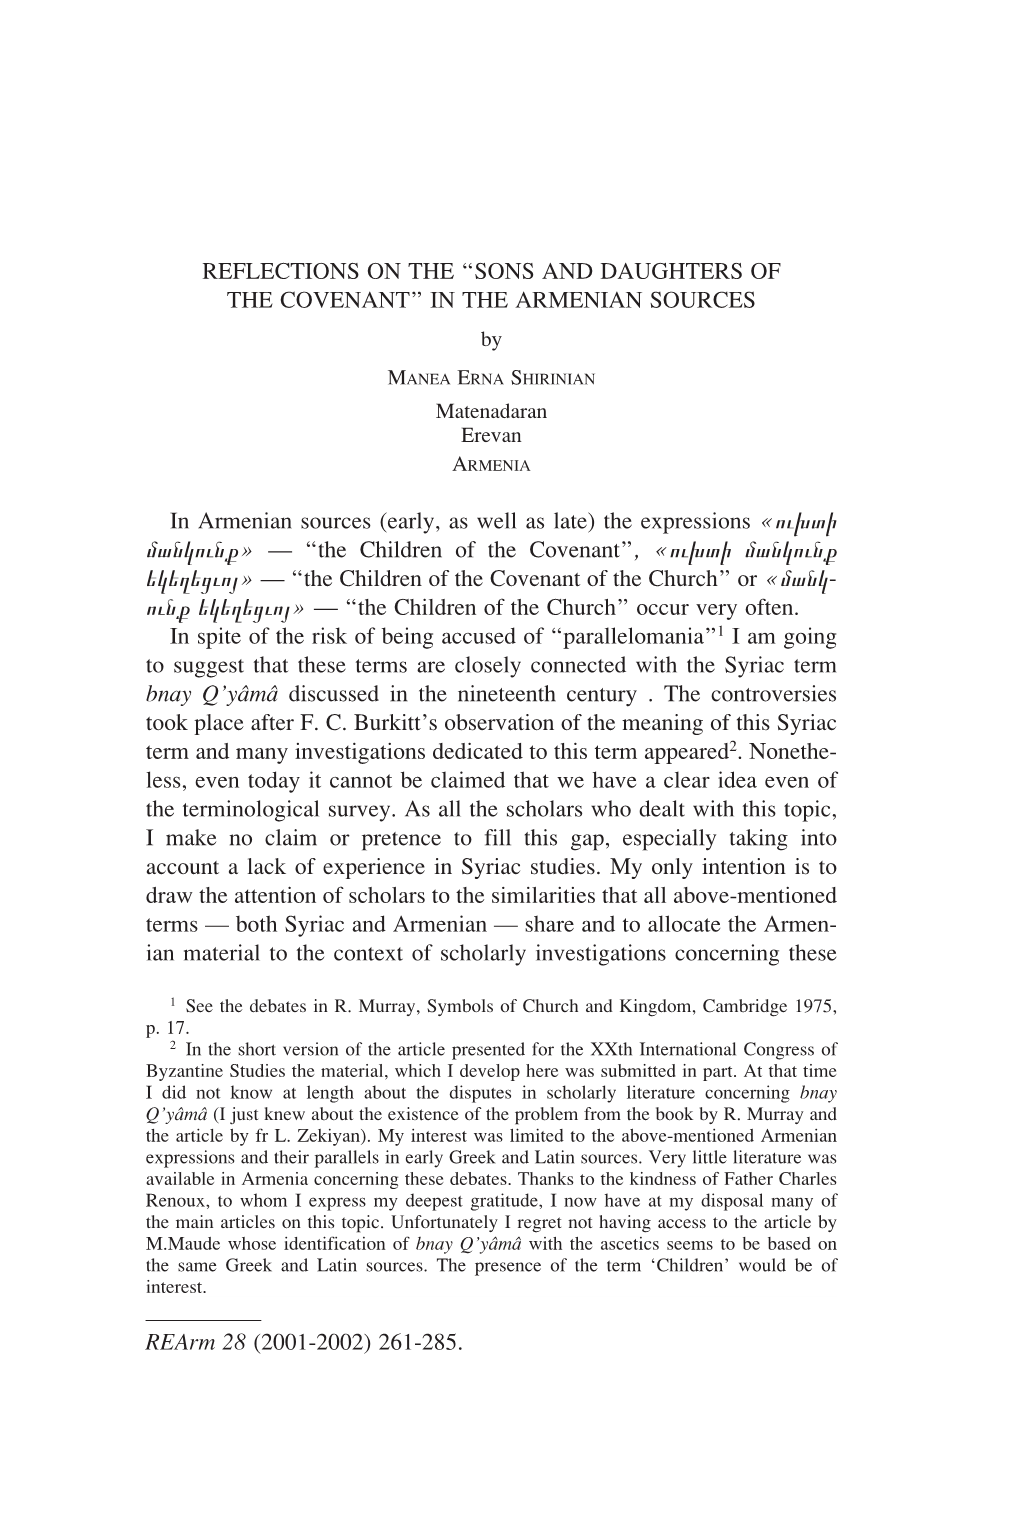 REFLECTIONS on the “SONS and DAUGHTERS of the COVENANT” in the ARMENIAN SOURCES in Armenian Sources (Early, As Well As Late)